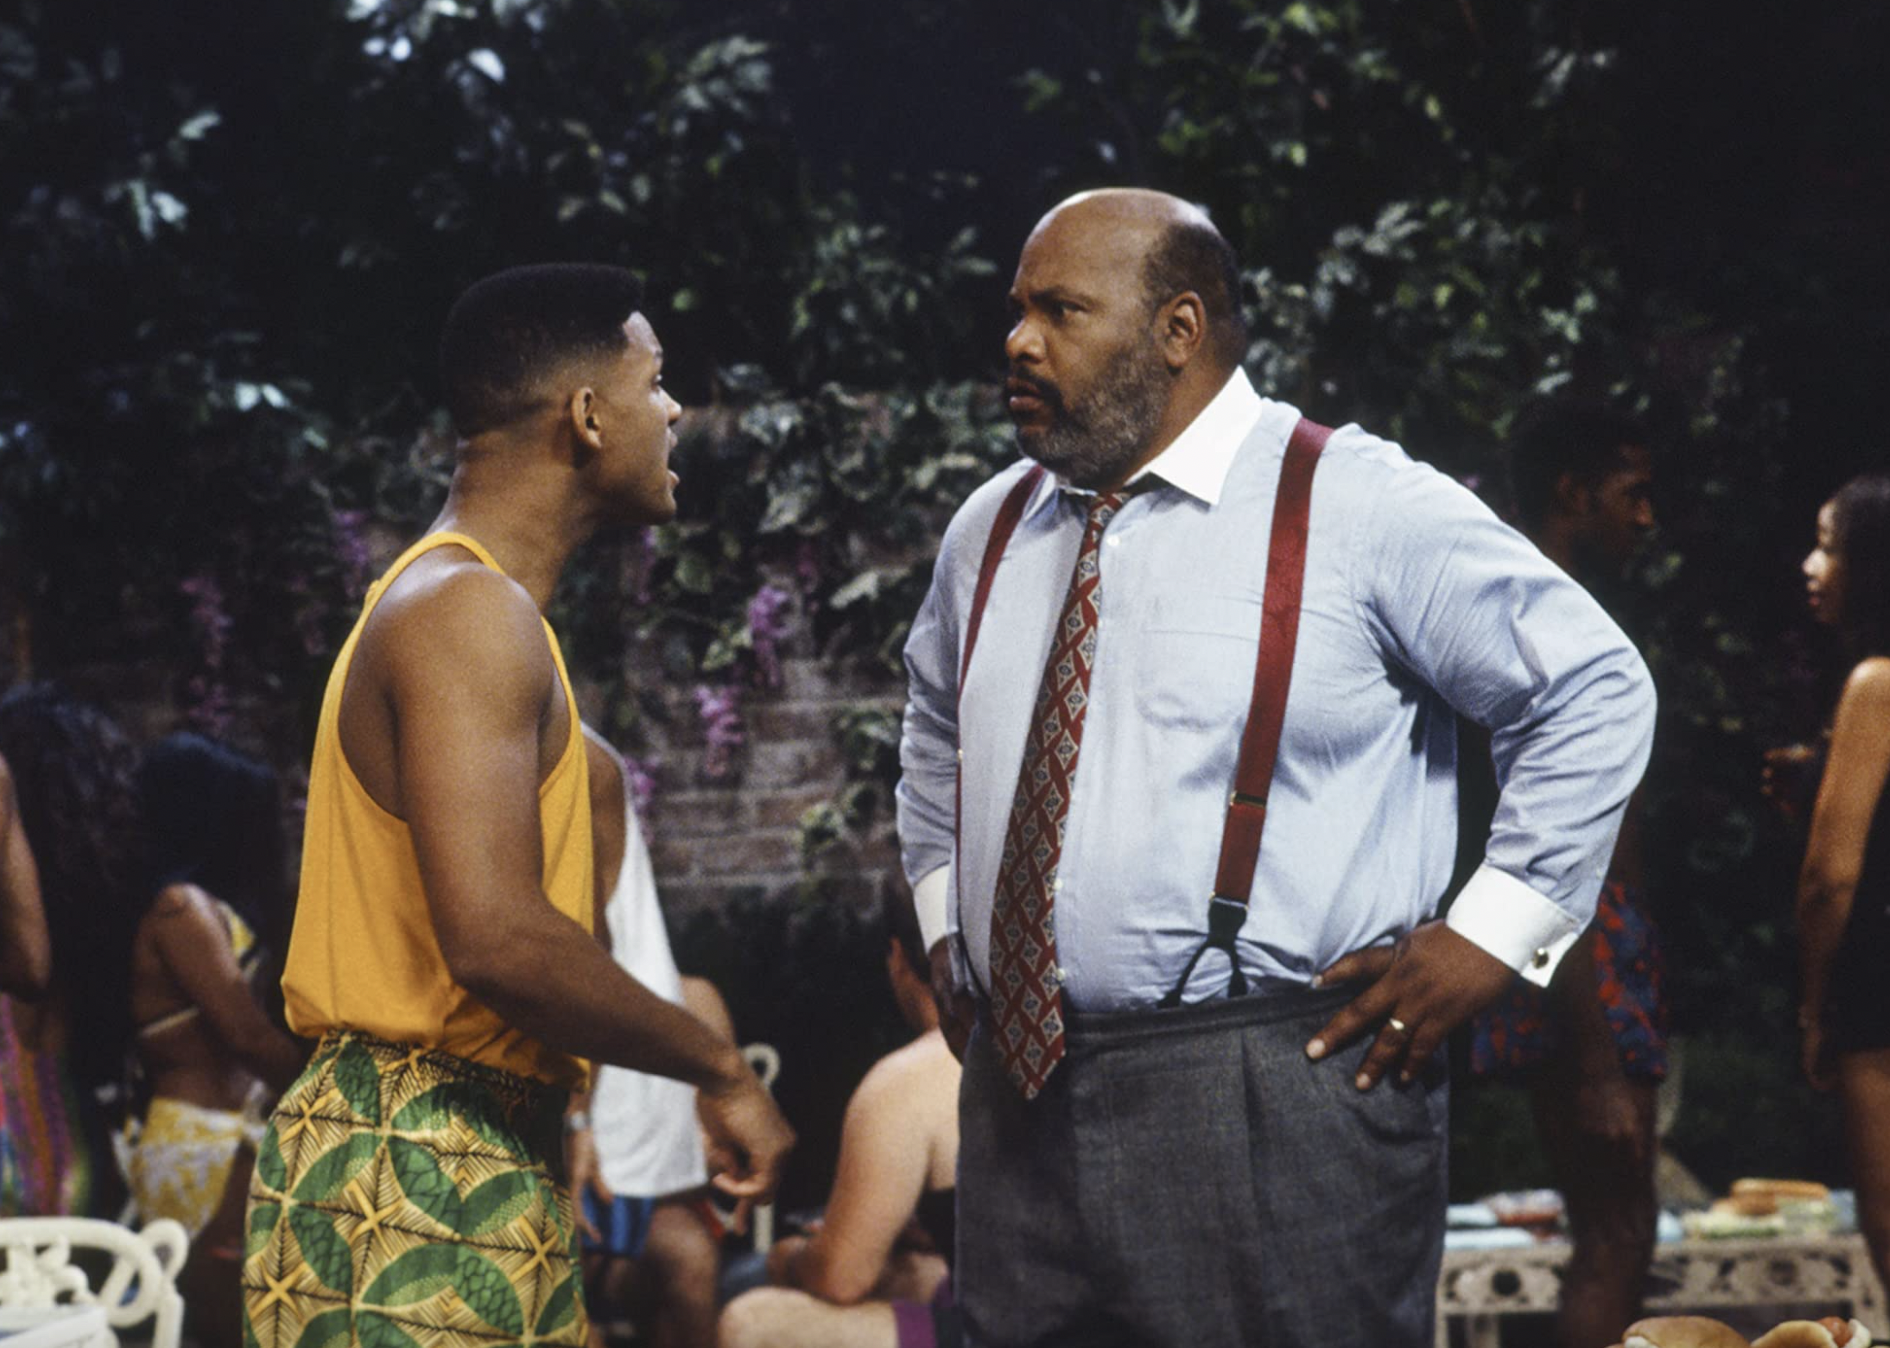 Will Smith and James Avery in "The Fresh Prince of Bel-Air".